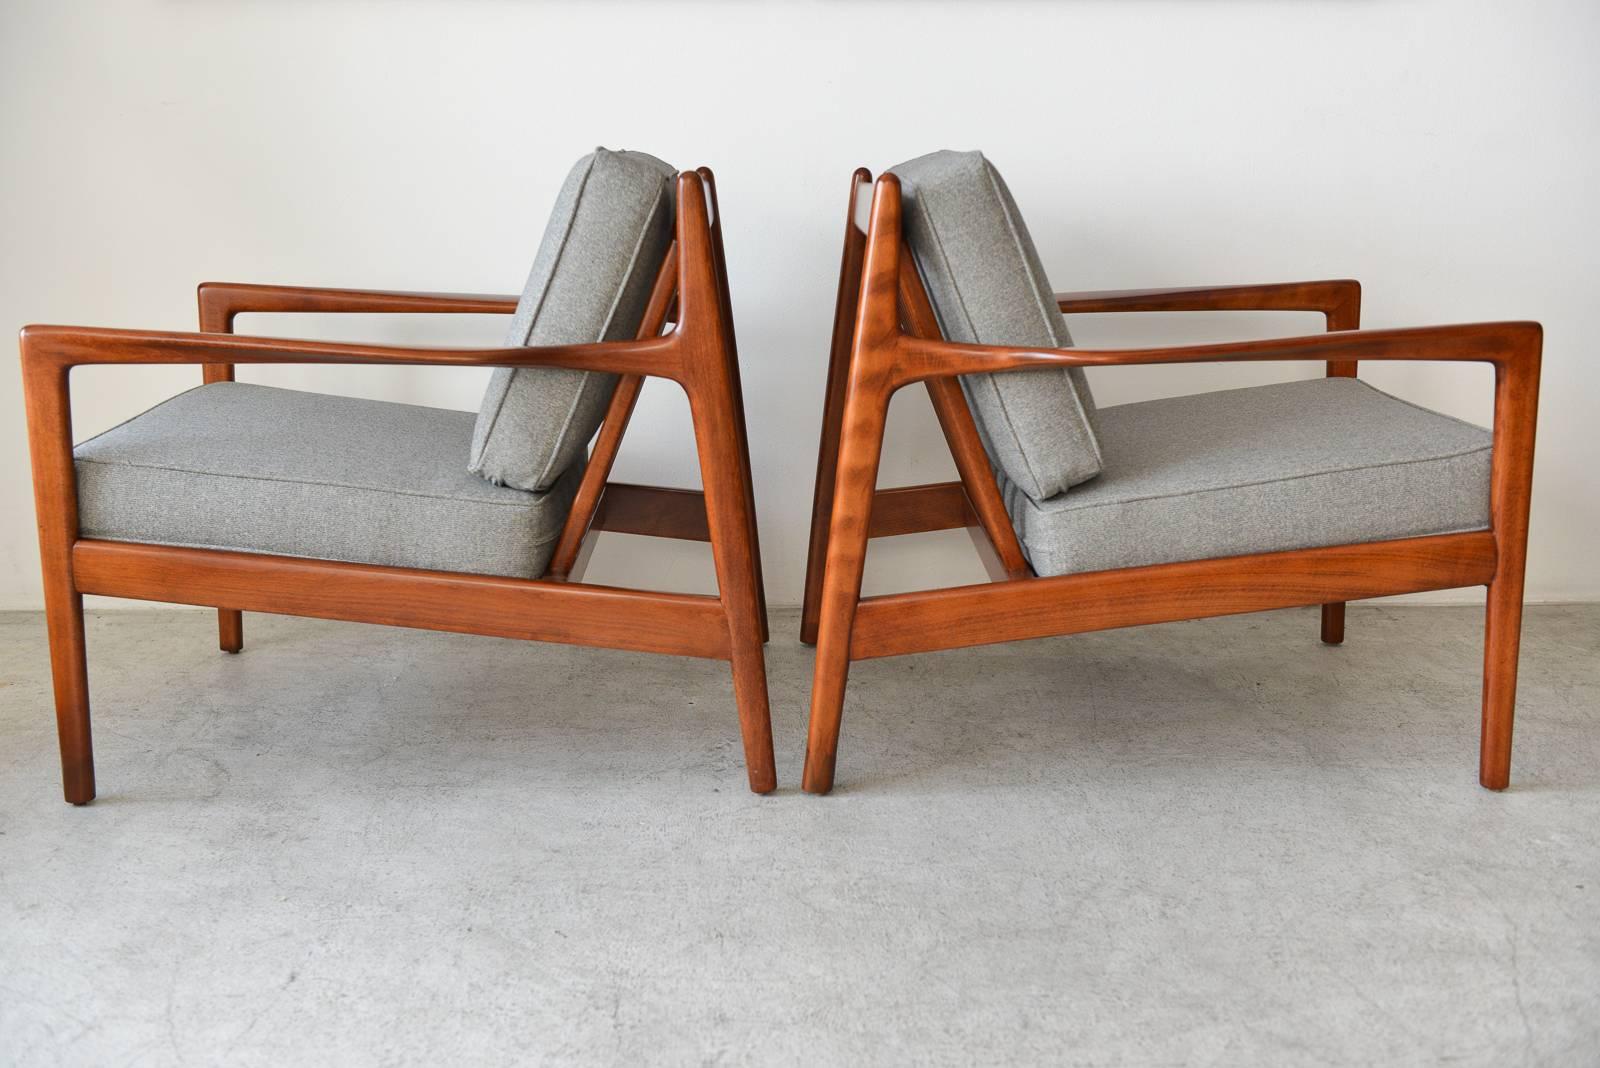 Pair of walnut lounge chairs by Folke Ohlsson for DUX, Sweden, circa 1960. Model USA 75. Professionally restored in showroom condition with new grey tweed fabric and cushions.

Available to see in our Modern Vault Showroom, 361 Old Newport Blvd,